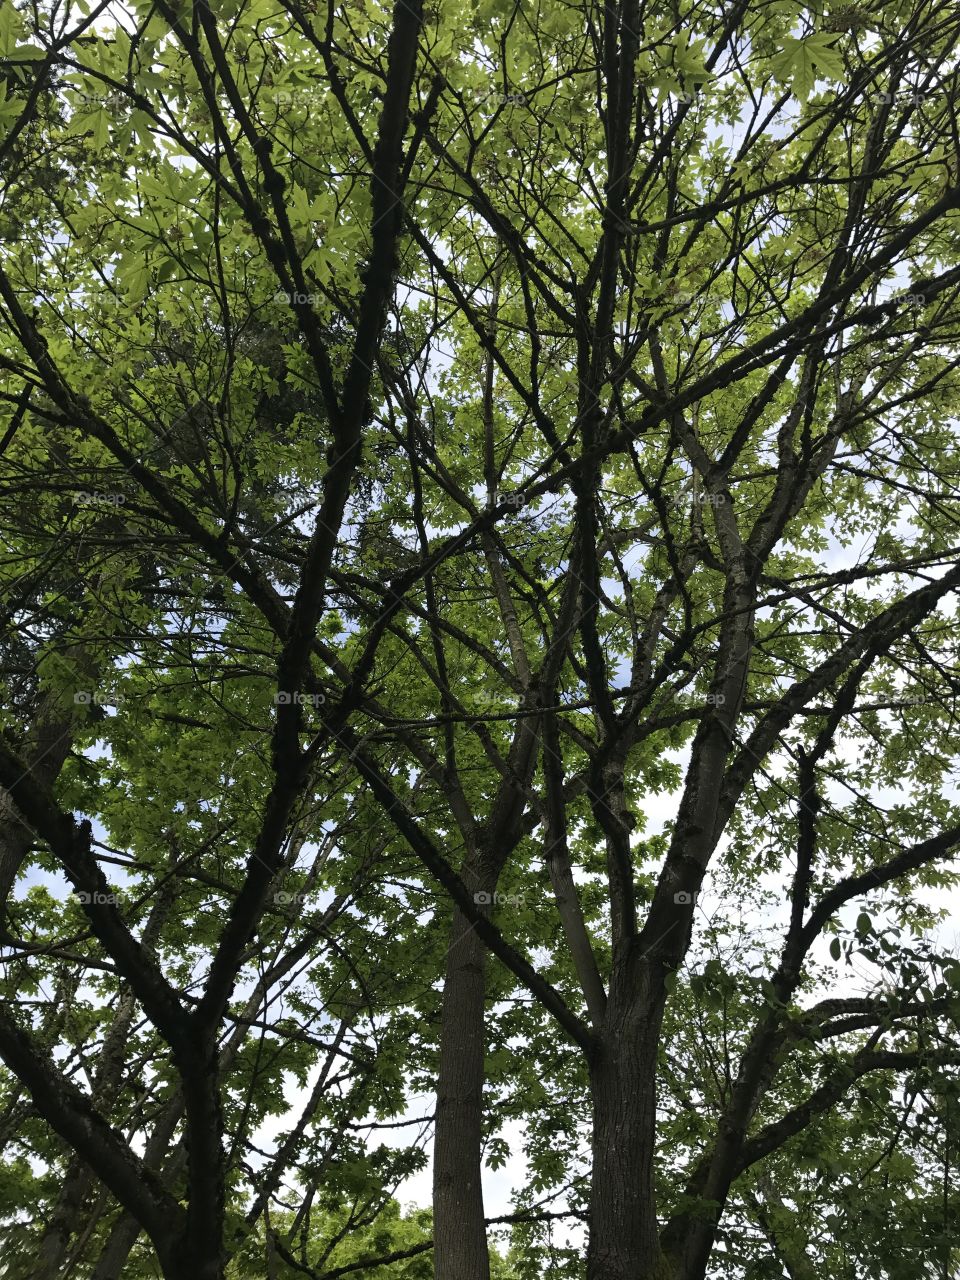 A tree I saw on the way home. When I looked up I thought the branches looked amazing.